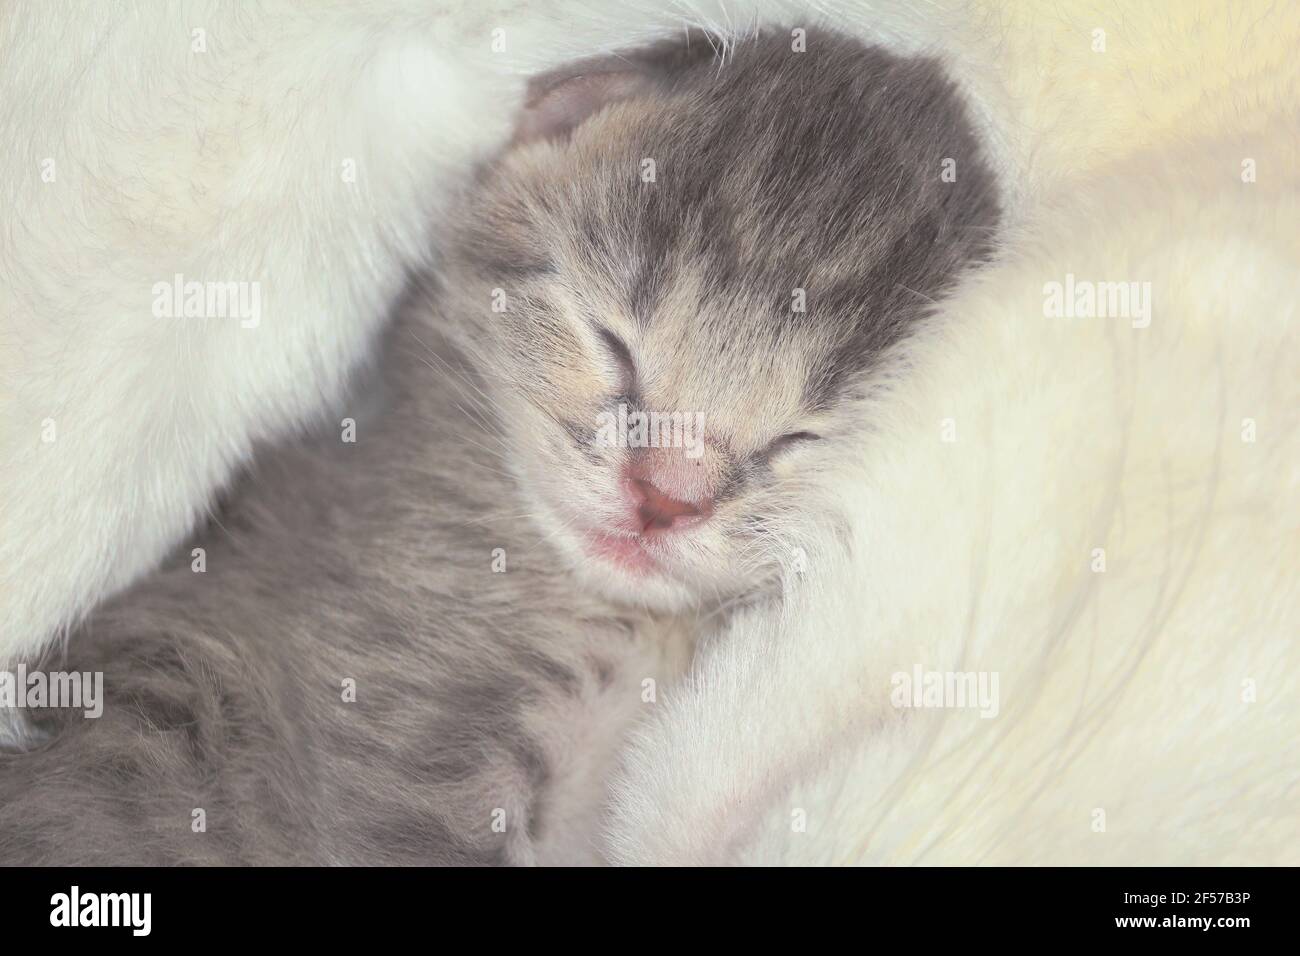 Newborn kitten sleeps with mom. Small striped muzzle of a kitten and part of a white muzzle of an adult cat close-up. Stock Photo